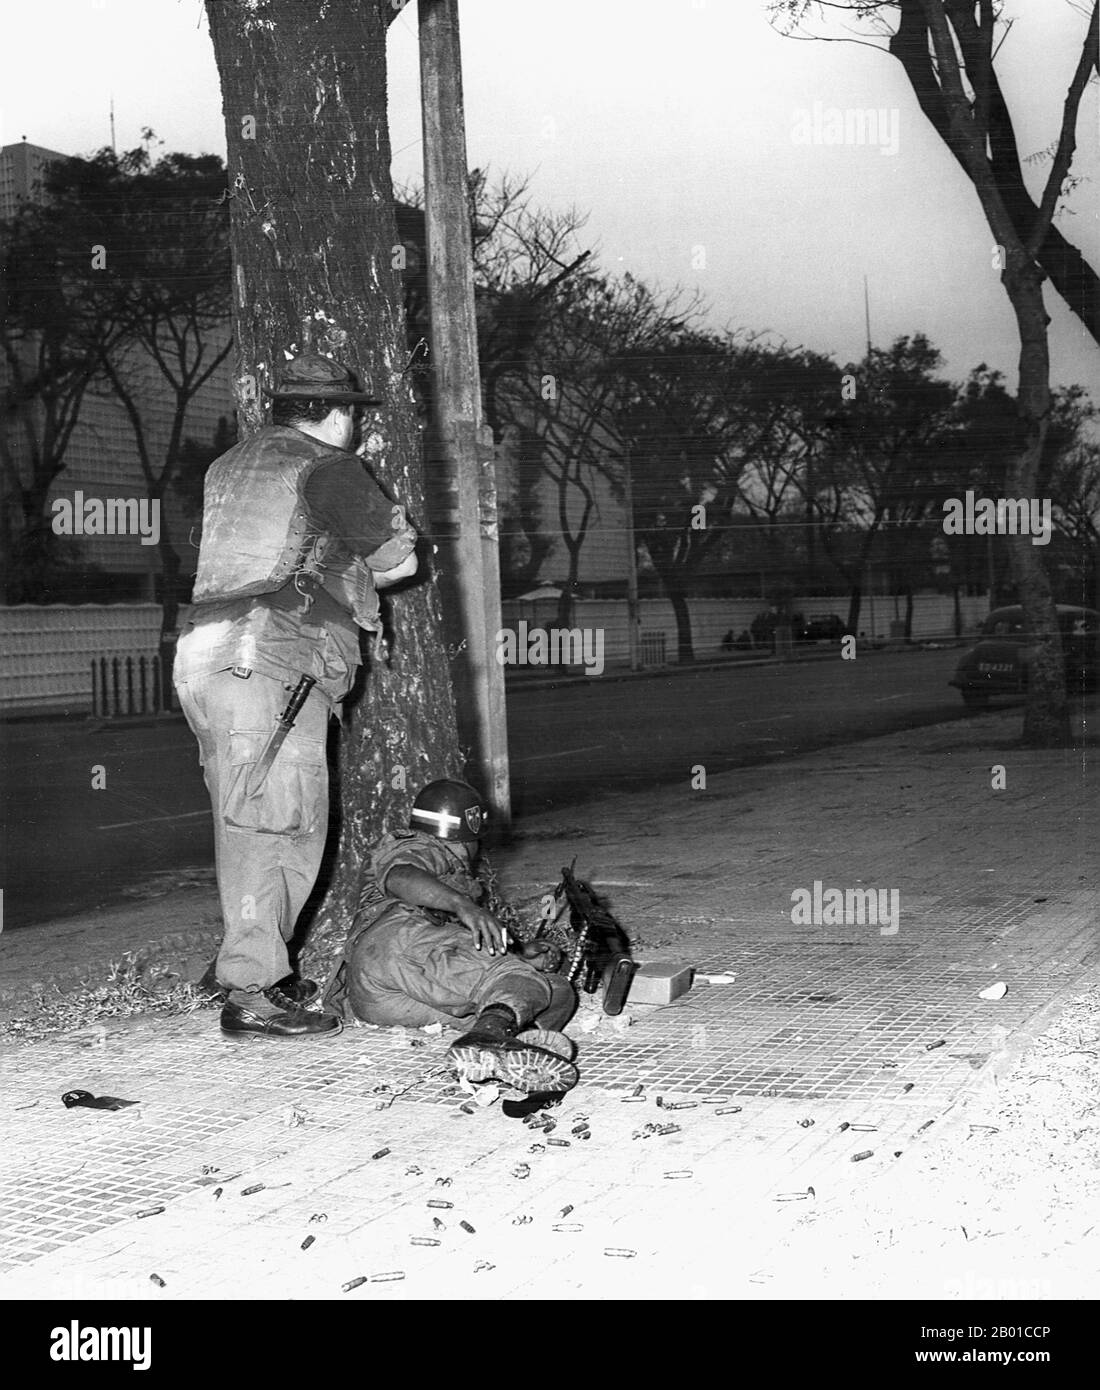 Vietnam: US Army Military Police take cover outside the US Embassy, Saigon, on Thong Nhut Boulevard - Tet Offensive, 31 January 1968.  Shortly after midnight on 31 January 1968, 19 Vietcong sappers from the elite C-10 Sapper Battalion gathered at a Vietcong safe house in a car repair shop at 59 Phan Thanh Gian Street to distribute weapons and conduct final preparations for the attack. At 02:47 hours, the Vietcong blew a small hole in the perimeter wall on Thong Nhut Boulevard and gained access to the embassy compound. Stock Photo